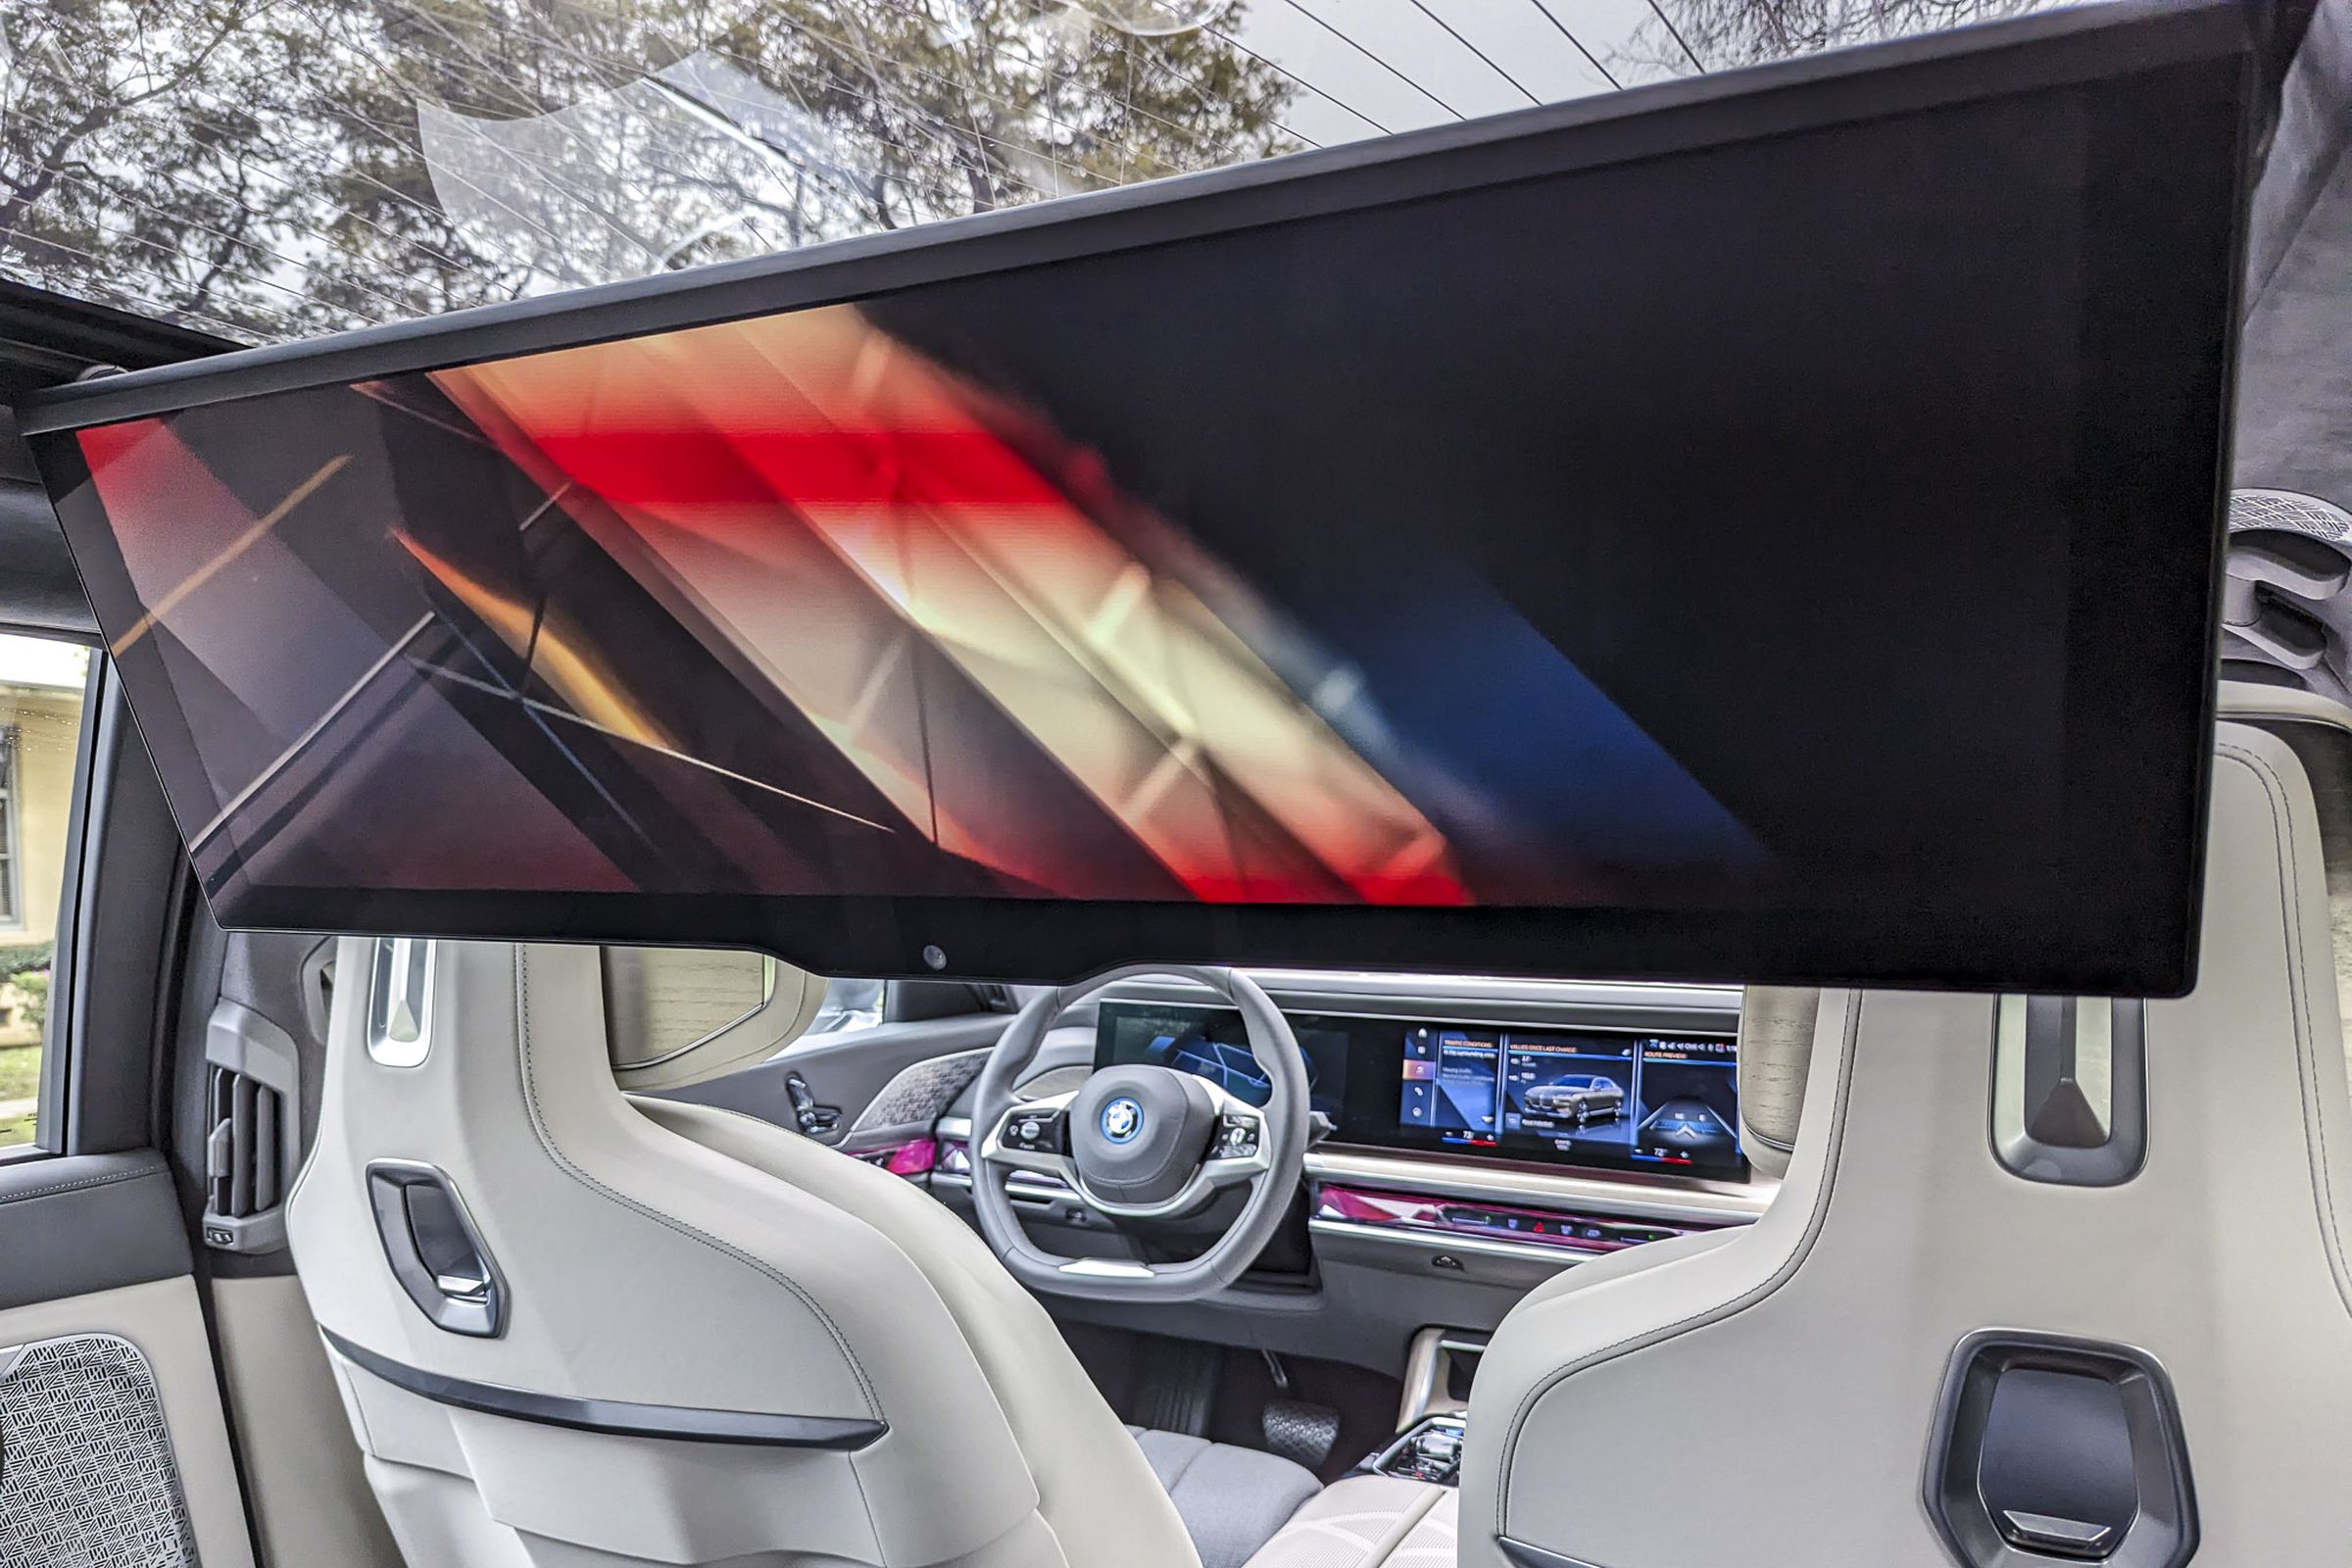 The 31-inch drop-down movie screen is the obvious centerpiece. 